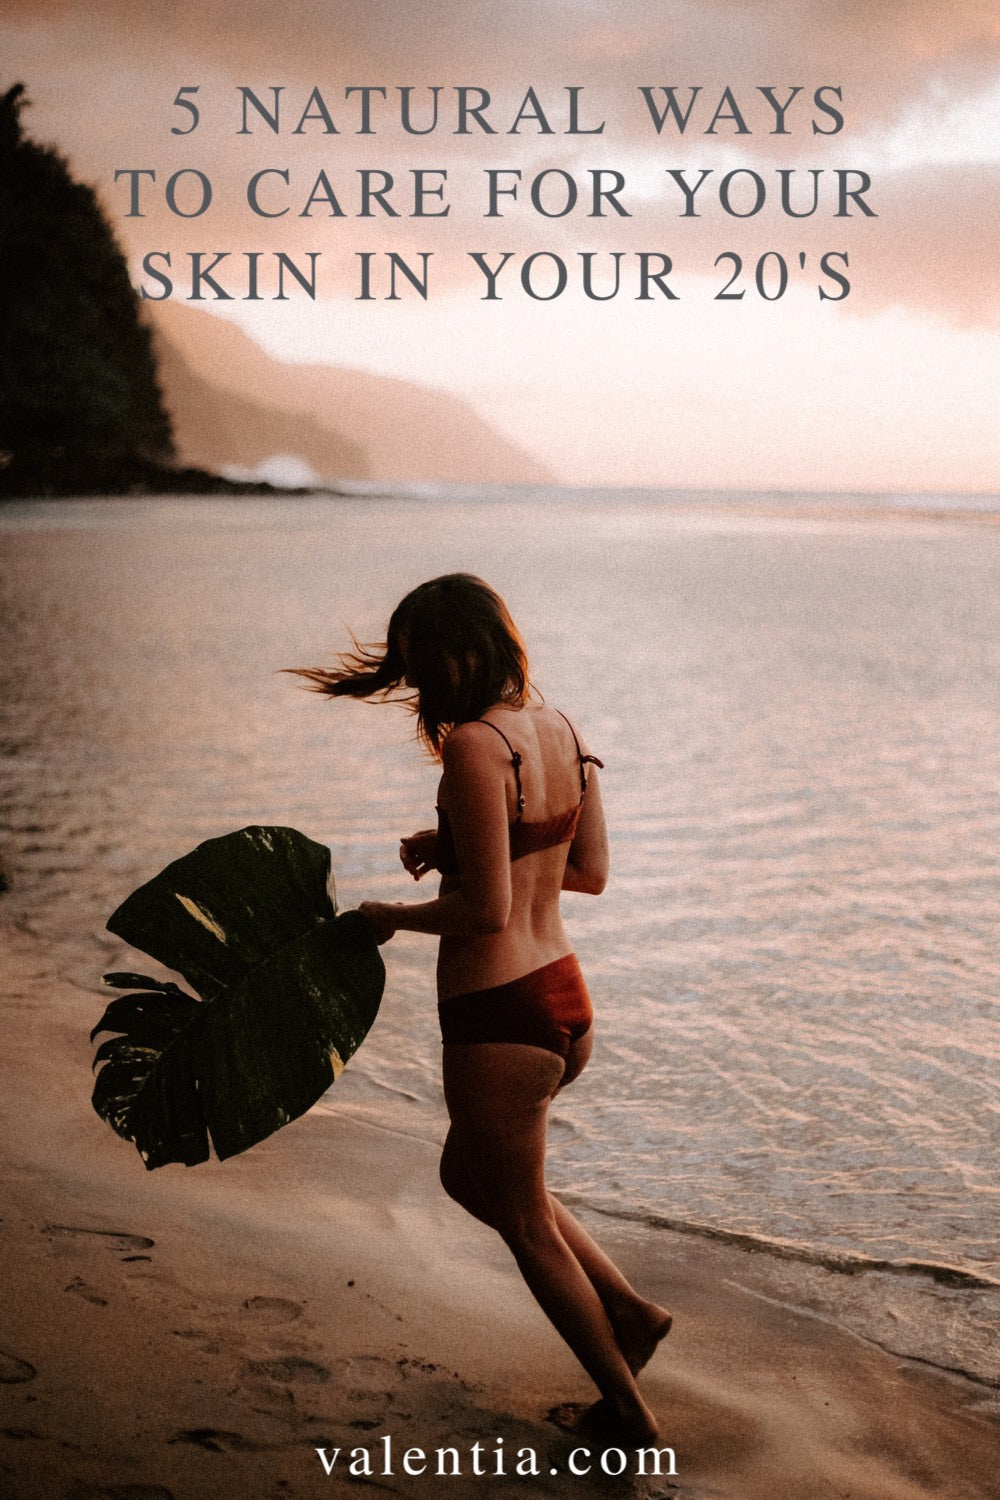 It’s never too early to start caring for your complexion—and the love you show your skin in your 20’s will reward you big time down the road. | During your 20's, skincare is all about nourishing, preserving, and protecting the good thing you’ve already got going—as opposed to trying to fix anything or turn back the clock. Here are five easy ways to set the stage for a lifetime of natural beauty.